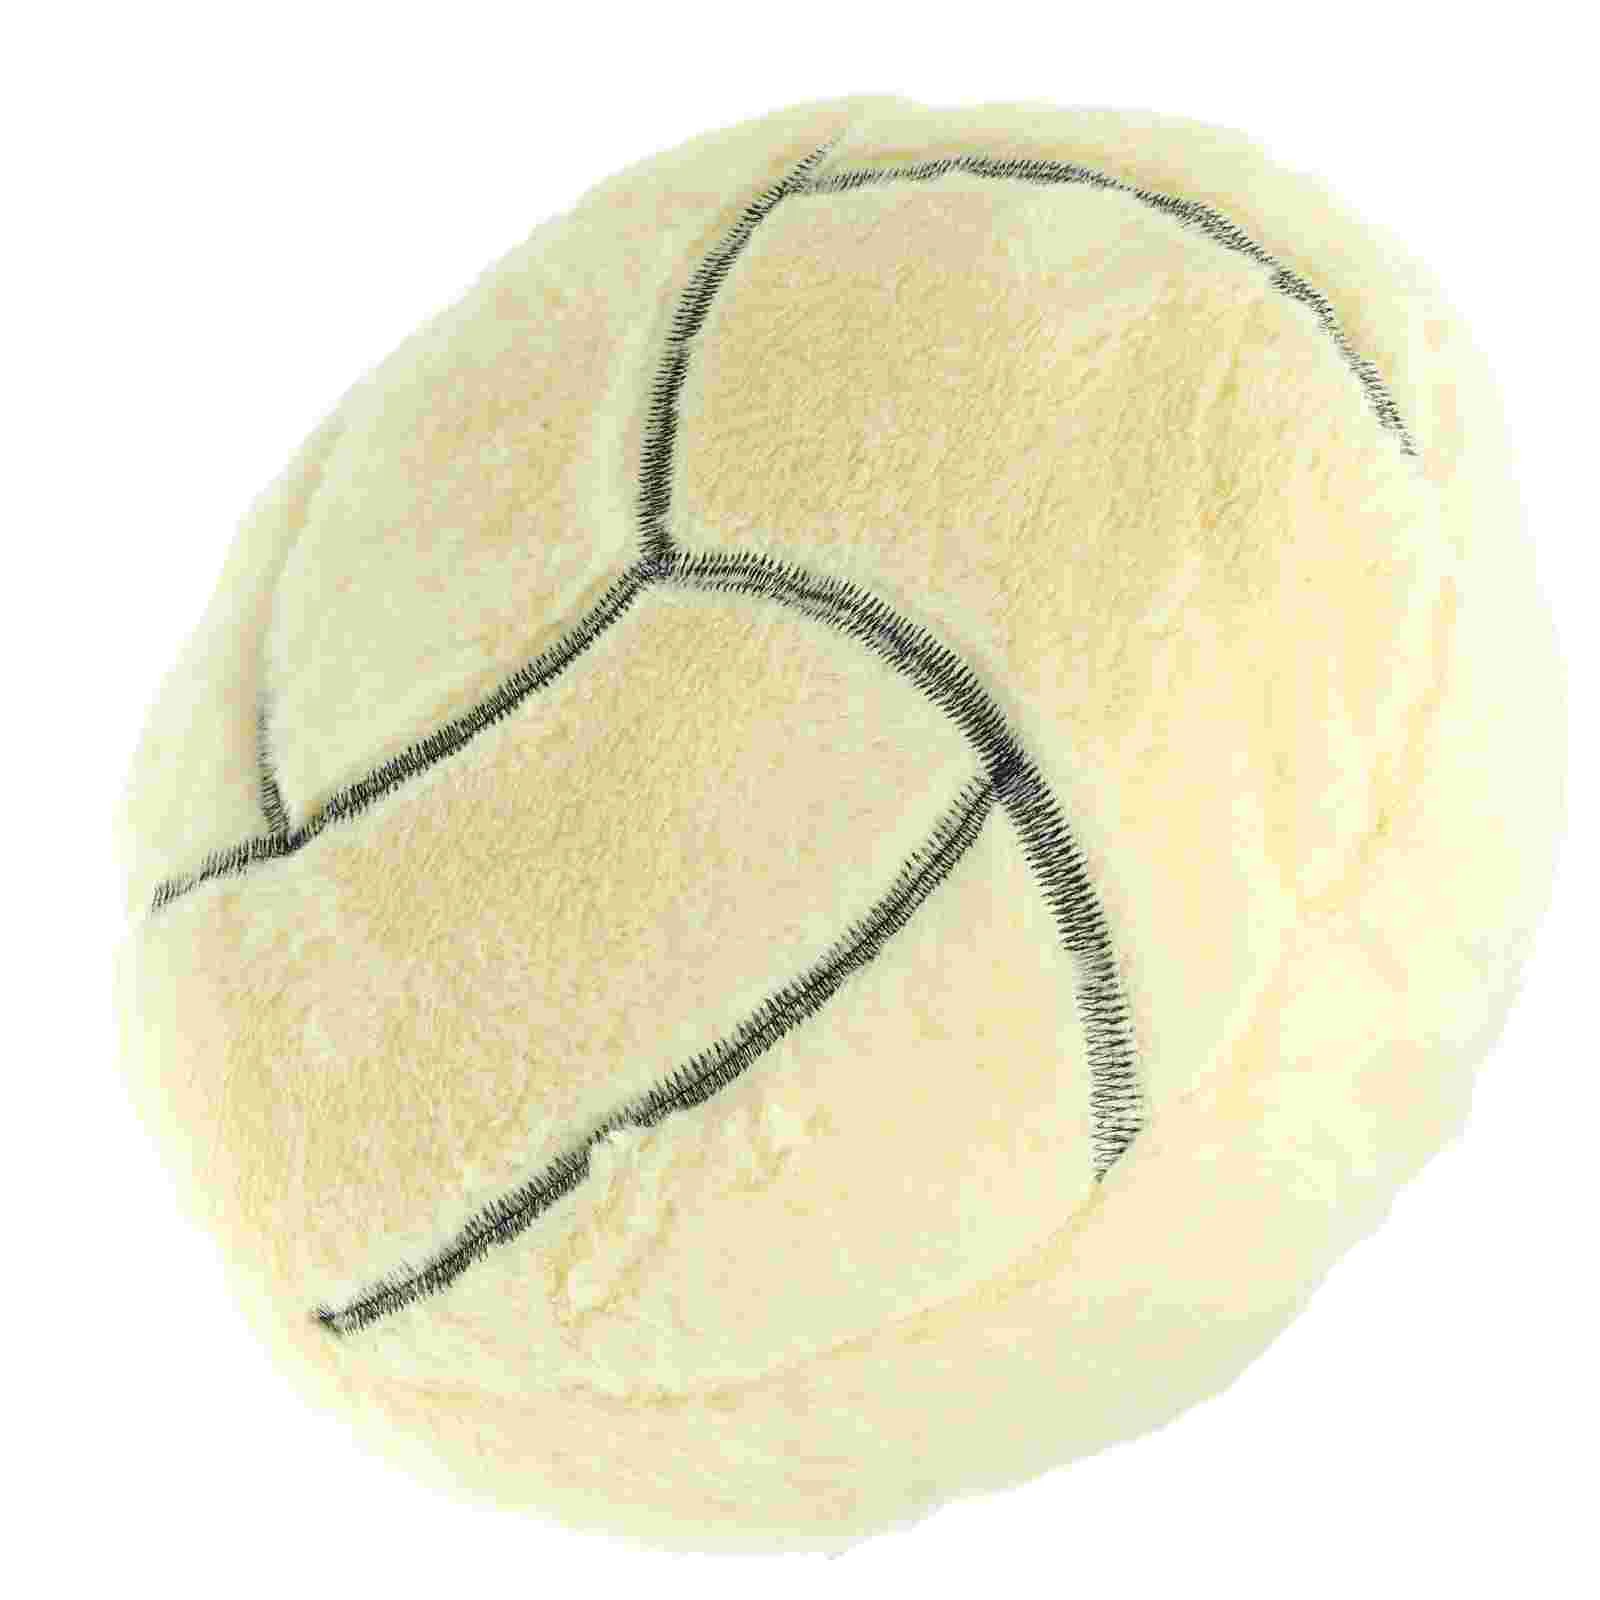 Pillow Throw Cushion Ball Bed Pillows Soft Volleyball Pp Cotton Cuddling Office Children's Toys original mikasa volleyball v200w match training ball 2019 fivb official volleyball